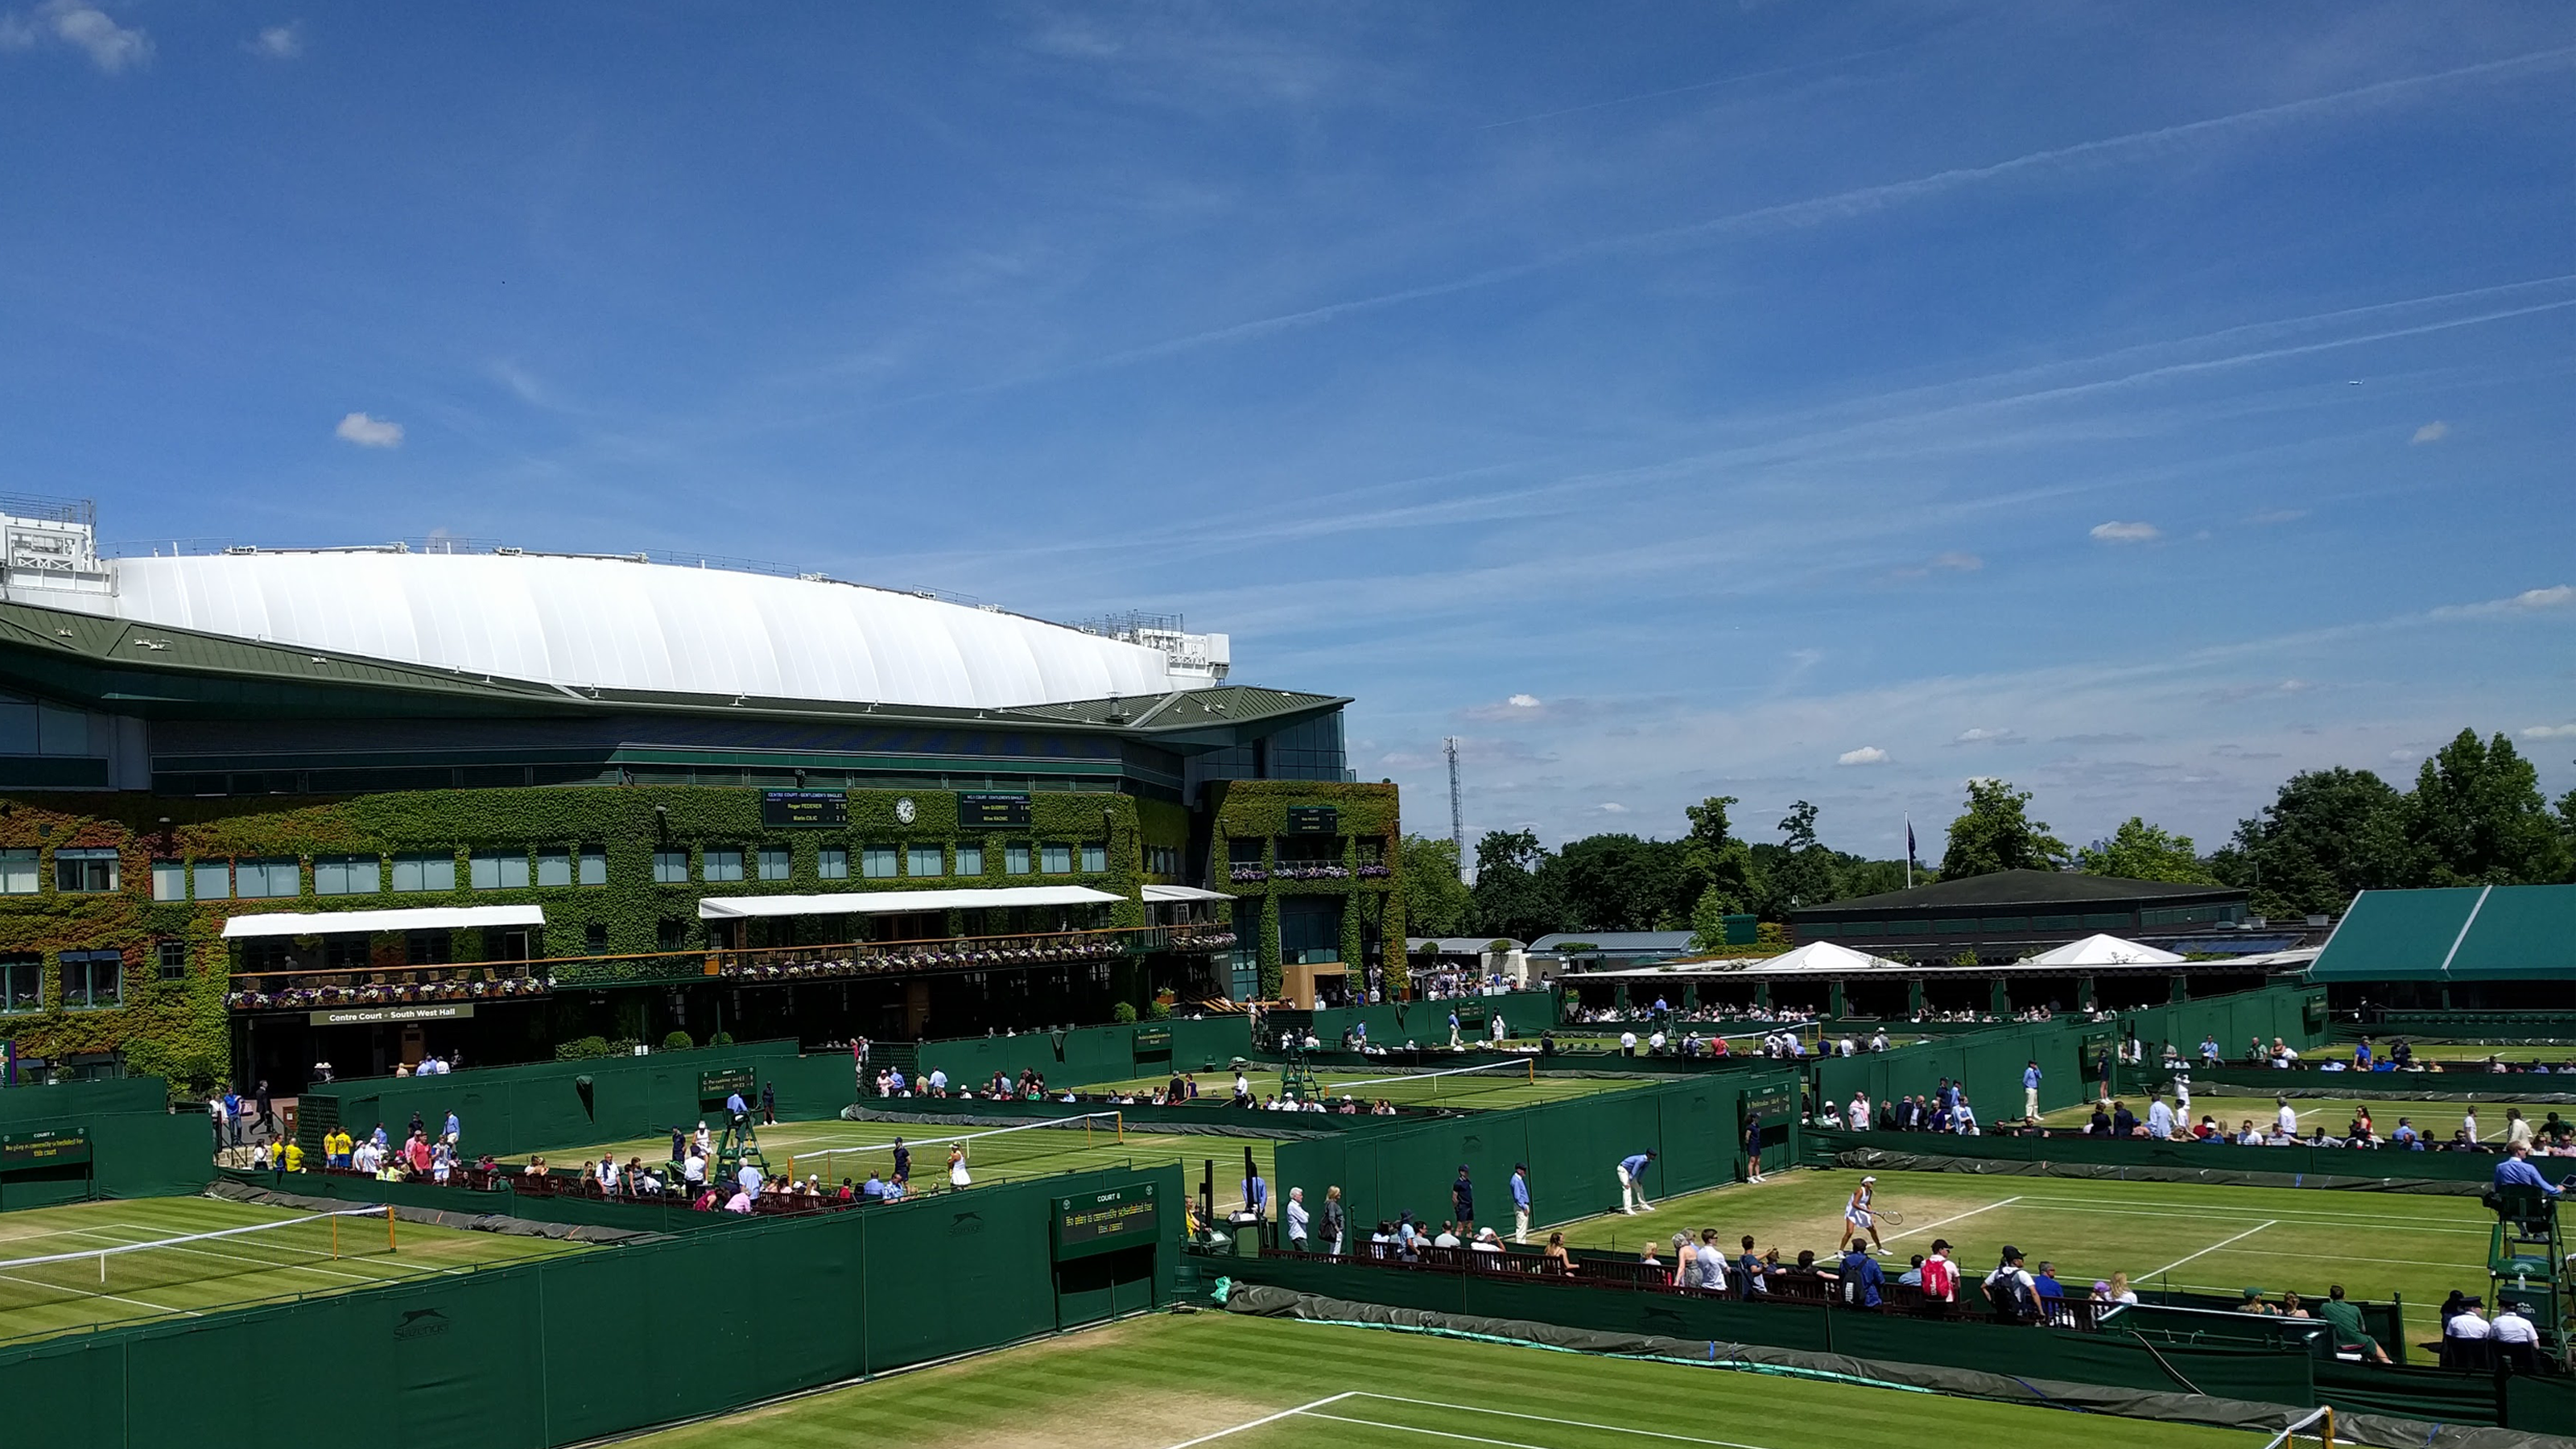 Wimbledon Lawn Tennis Club moves one step closer to expansion